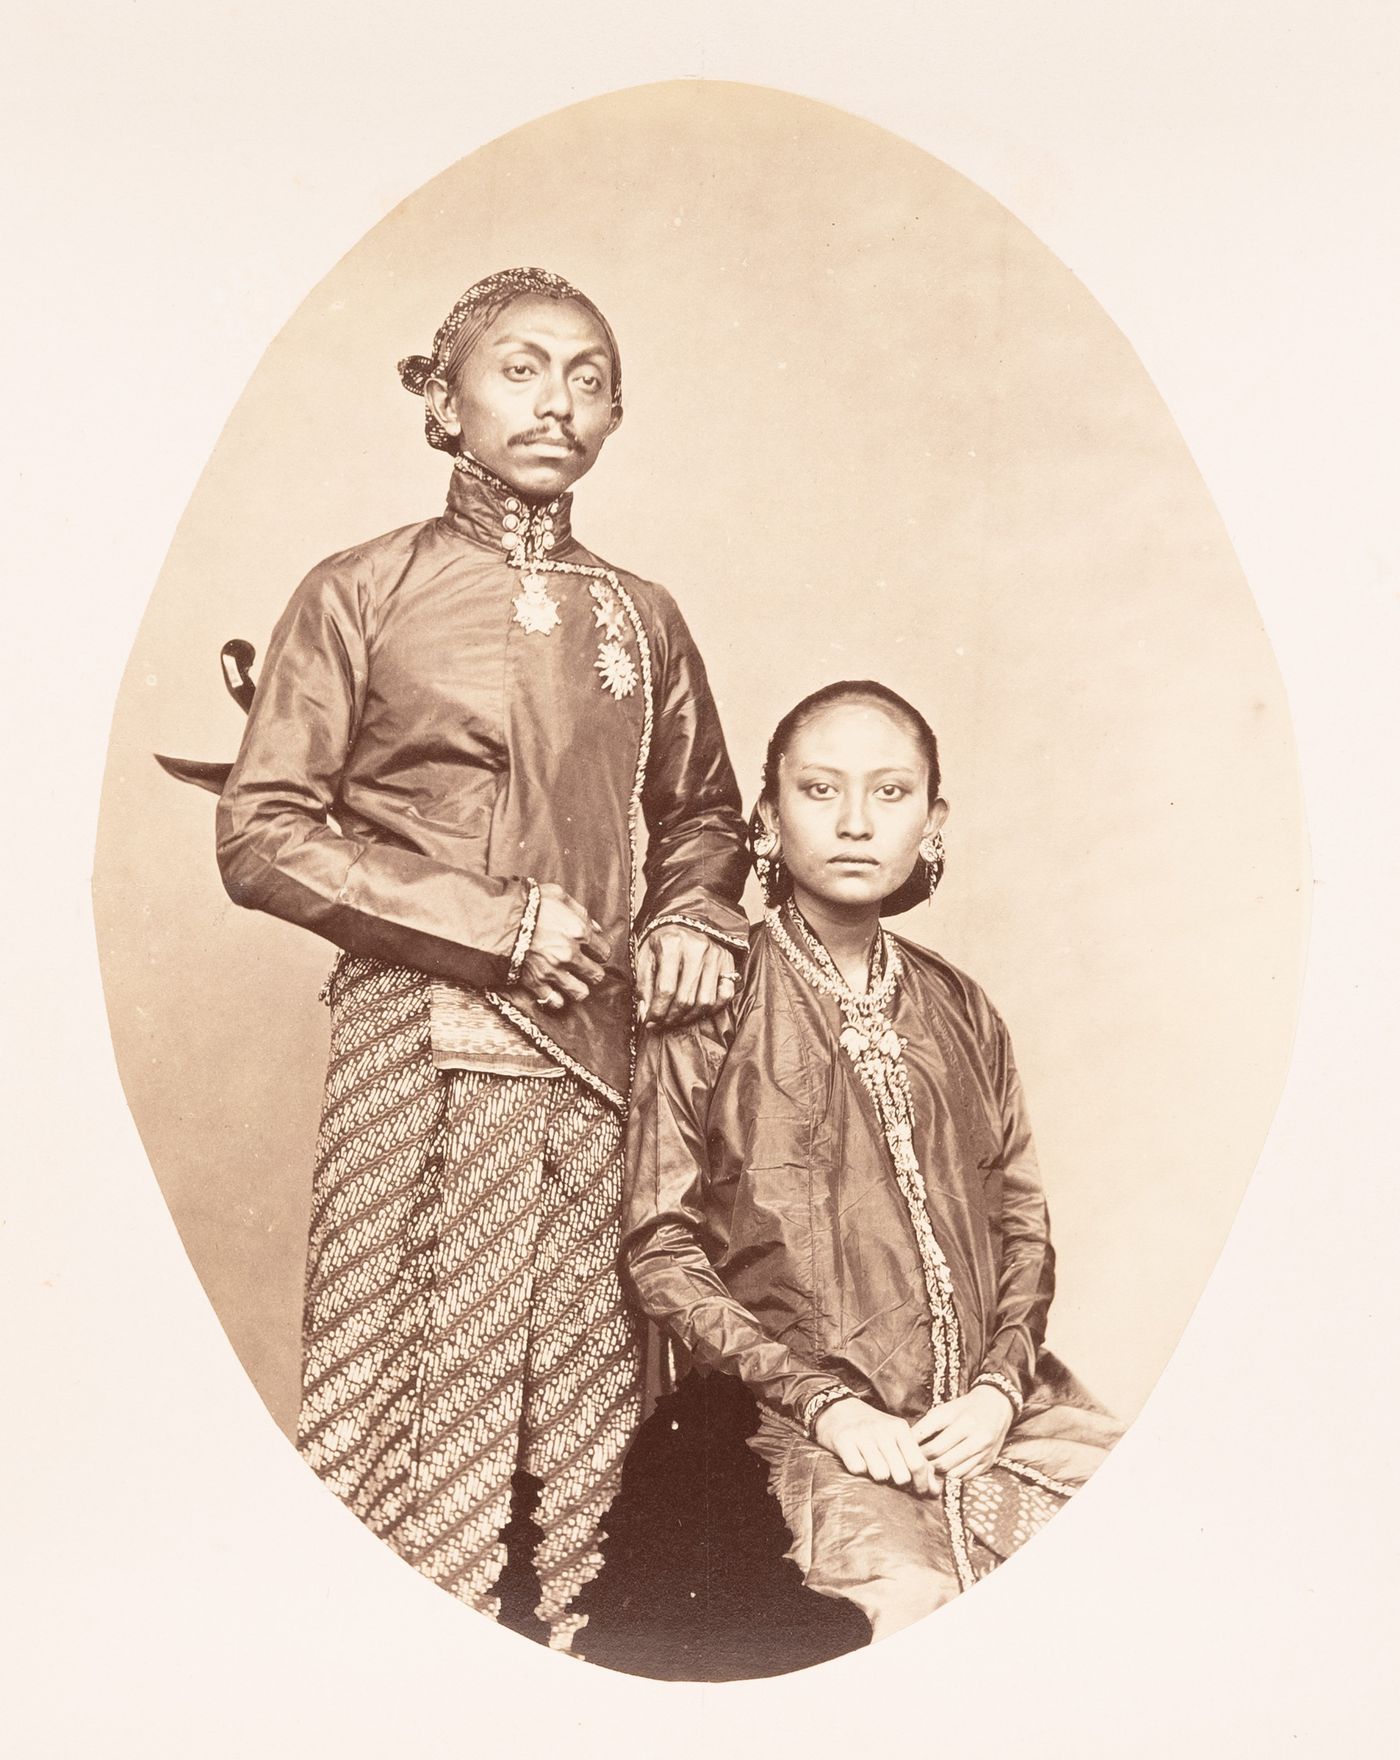 Group portrait of Sultan Paku Buwono IX, Sunan of Solo (now also known as Surakarta) and his Royal spouse, Ratu Paku Buwono, Solo (now also known as Surakarta), Dutch East Indies (now Indonesia)